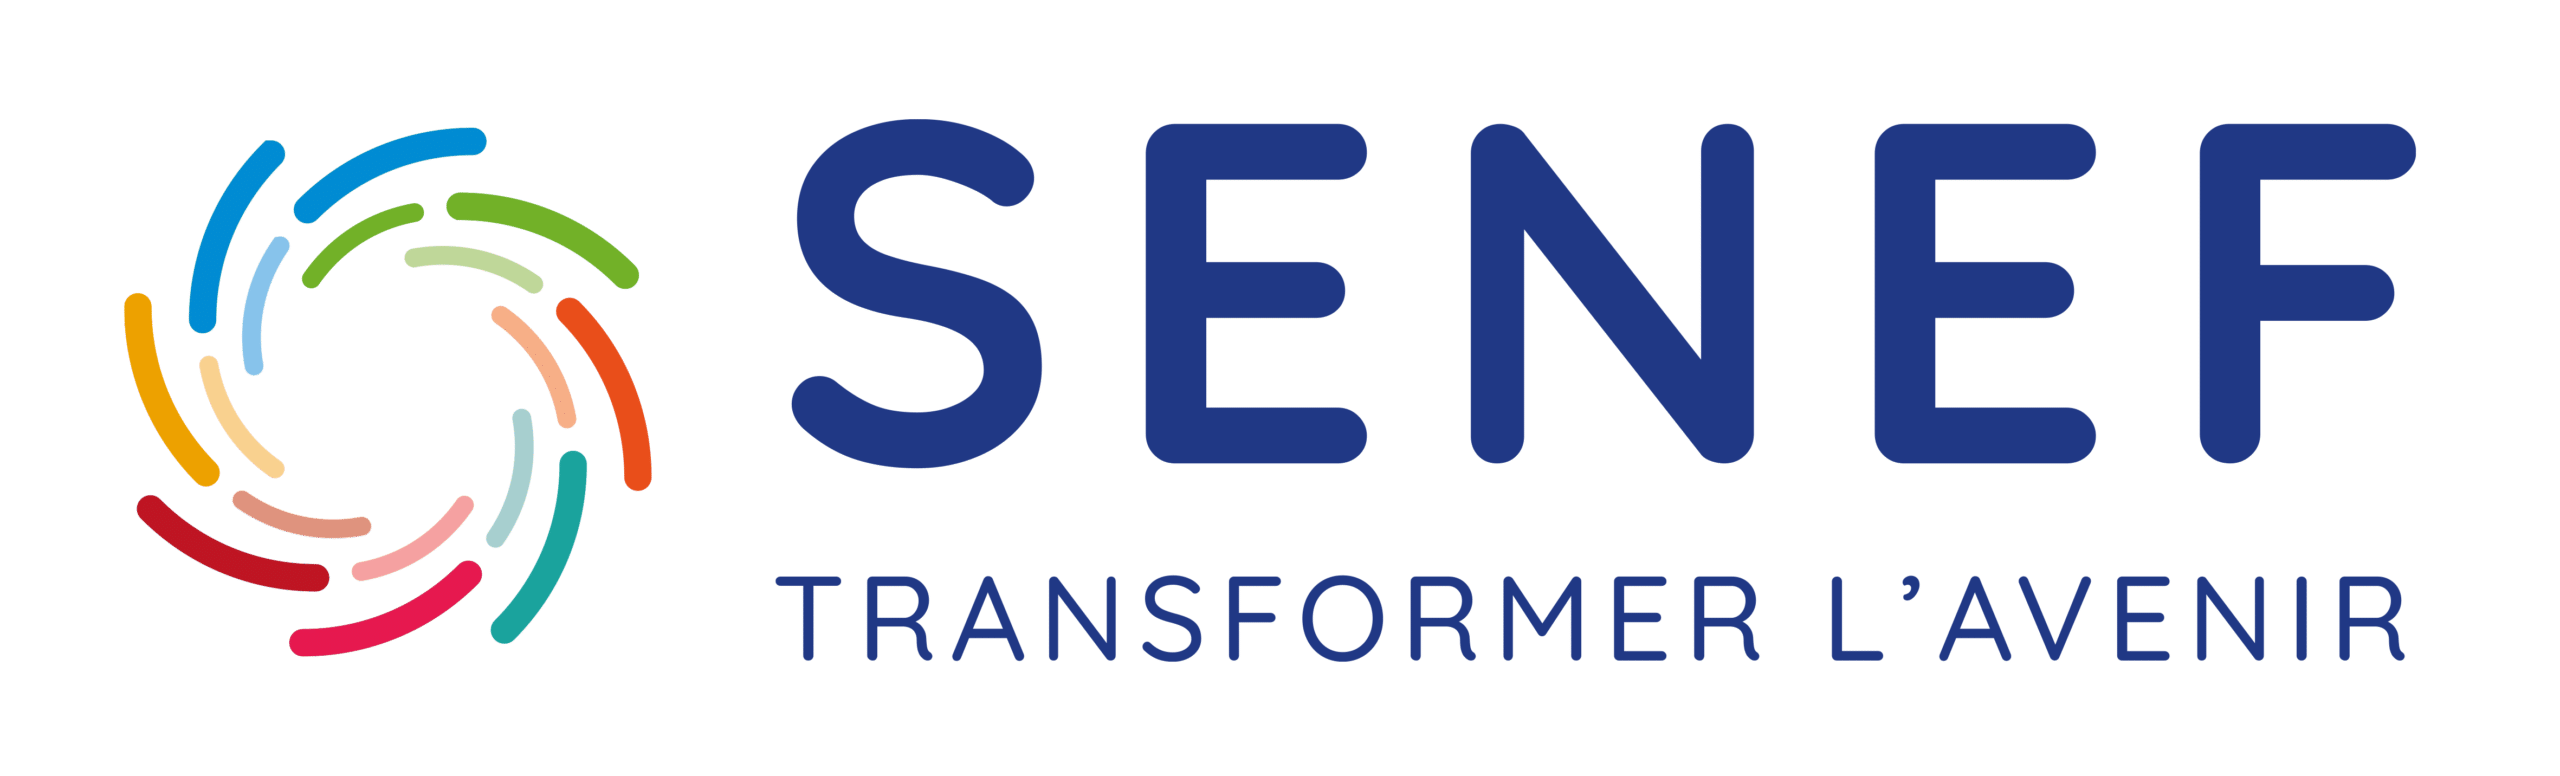 The Senef group, publisher of the Progiclean software solution for cleaning companies